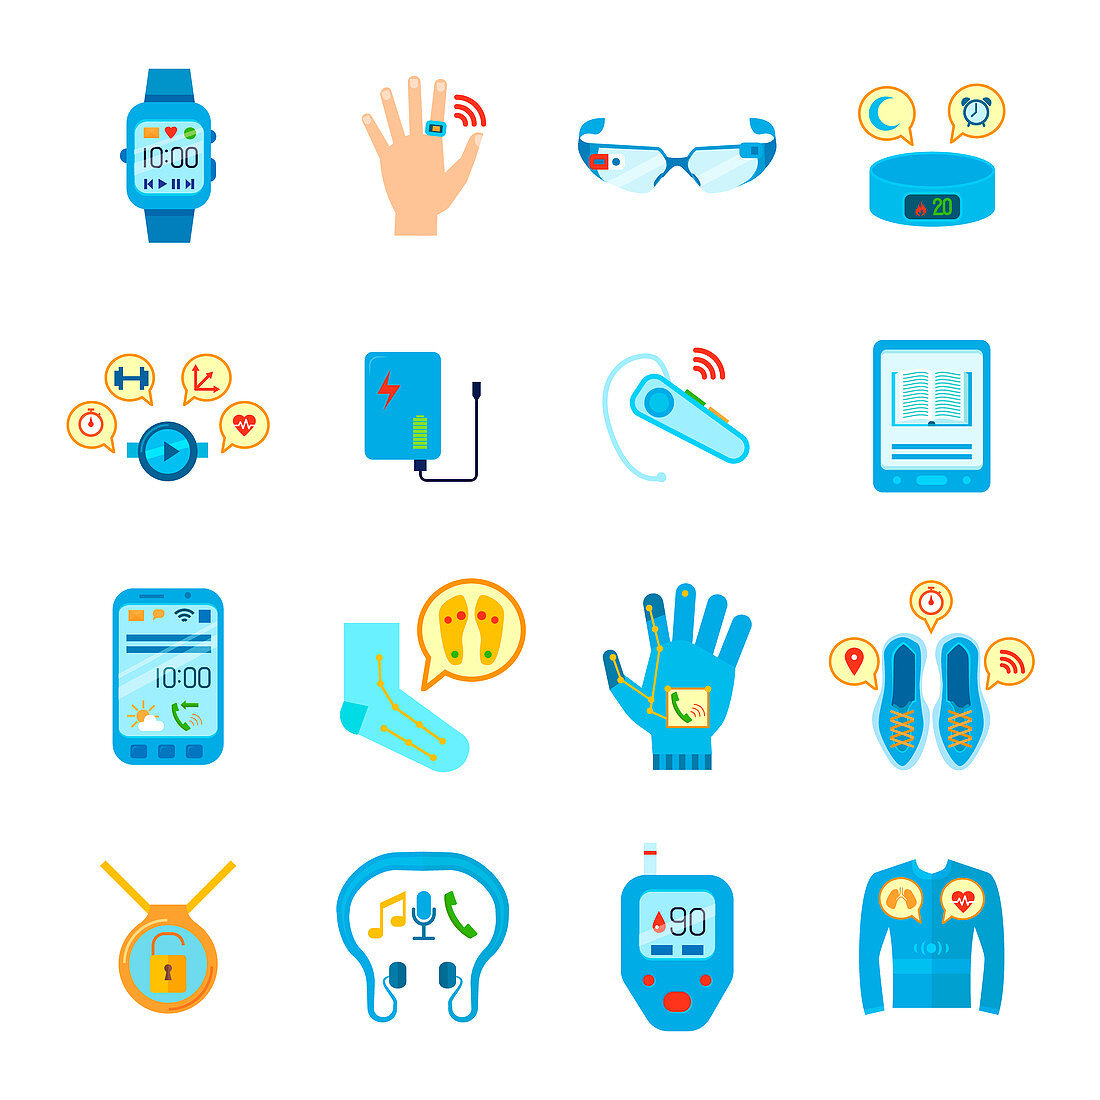 Wearable technology icons, illustration